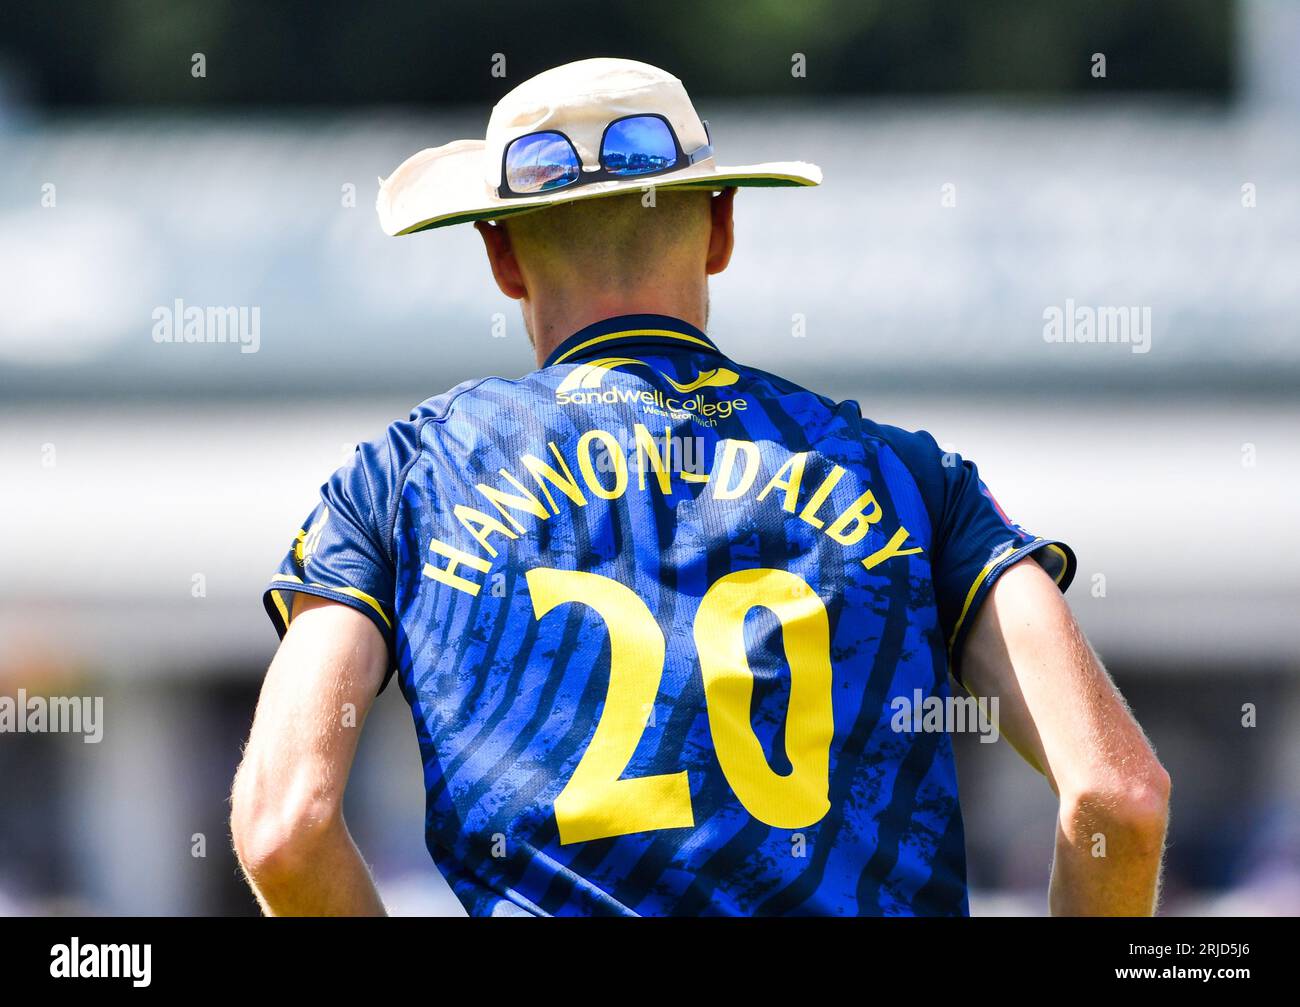 Hove UK 22nd August 2023 - Oliver Hannon-Dalby of Warwickshire in the field against Sussex Sharks during their One Day Cup cricket match at the 1st Central County Ground in Hove : Credit Simon Dack /TPI/ Alamy Live News Stock Photo